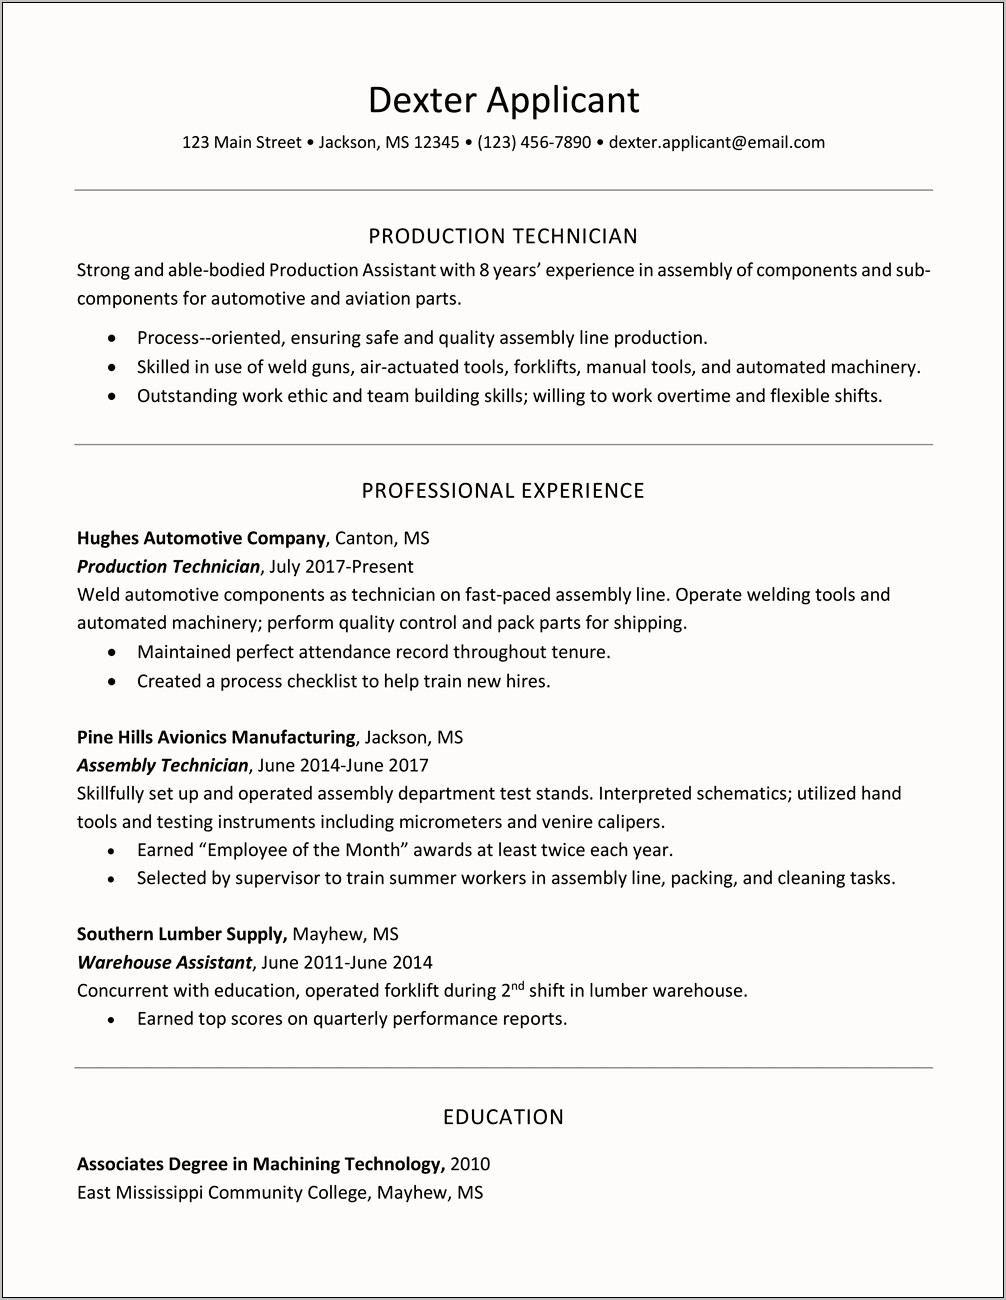 Clean Up Work History For Resume